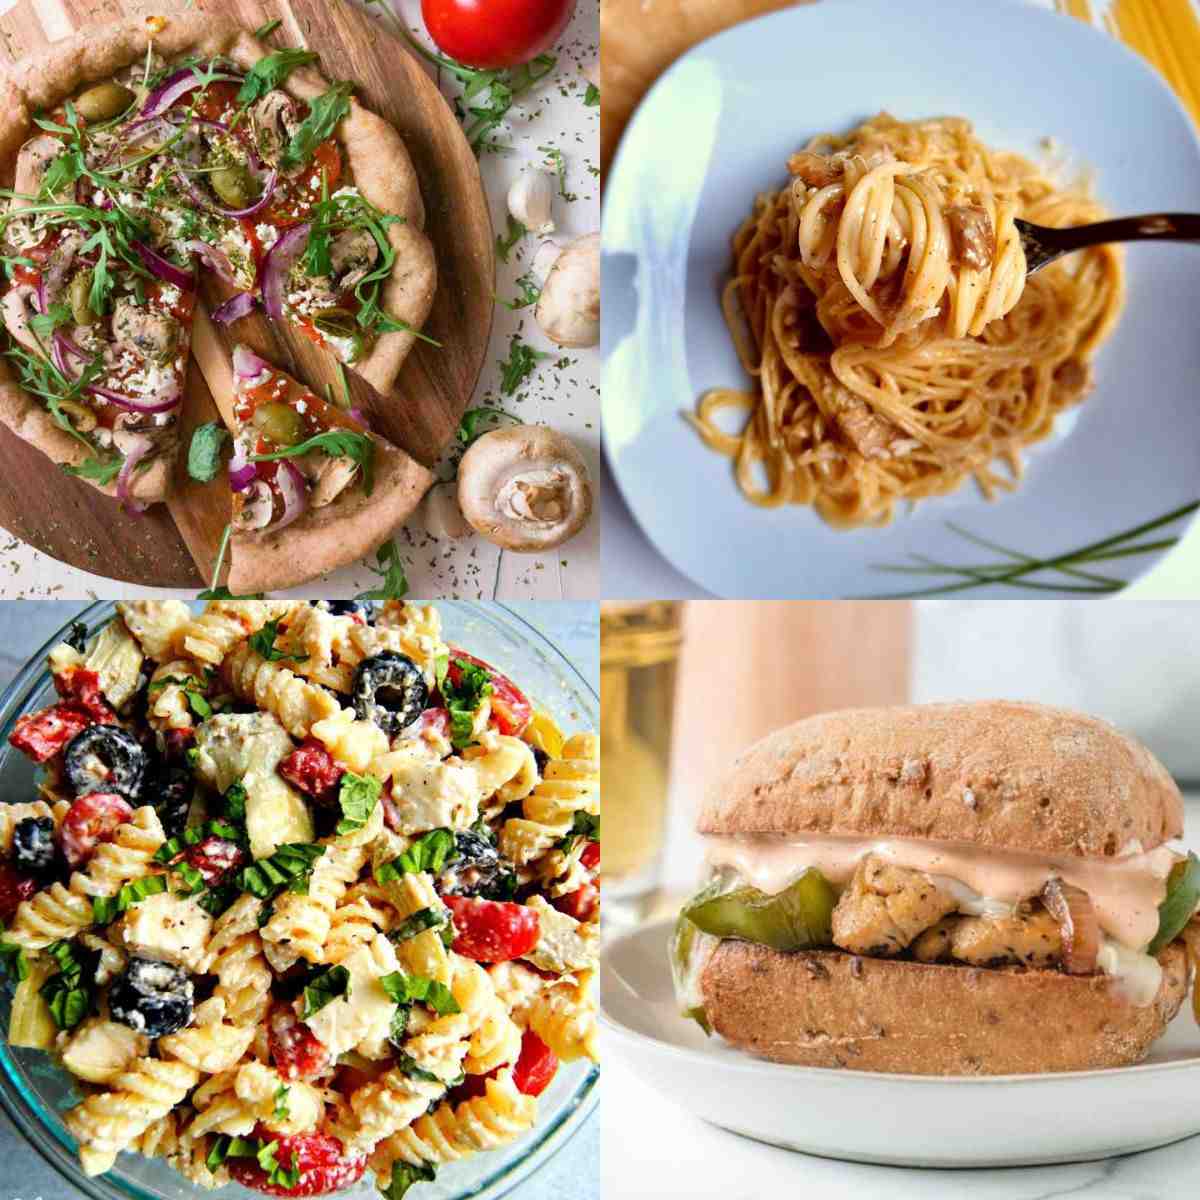 Four gluten-free savoury dishes in a collage.